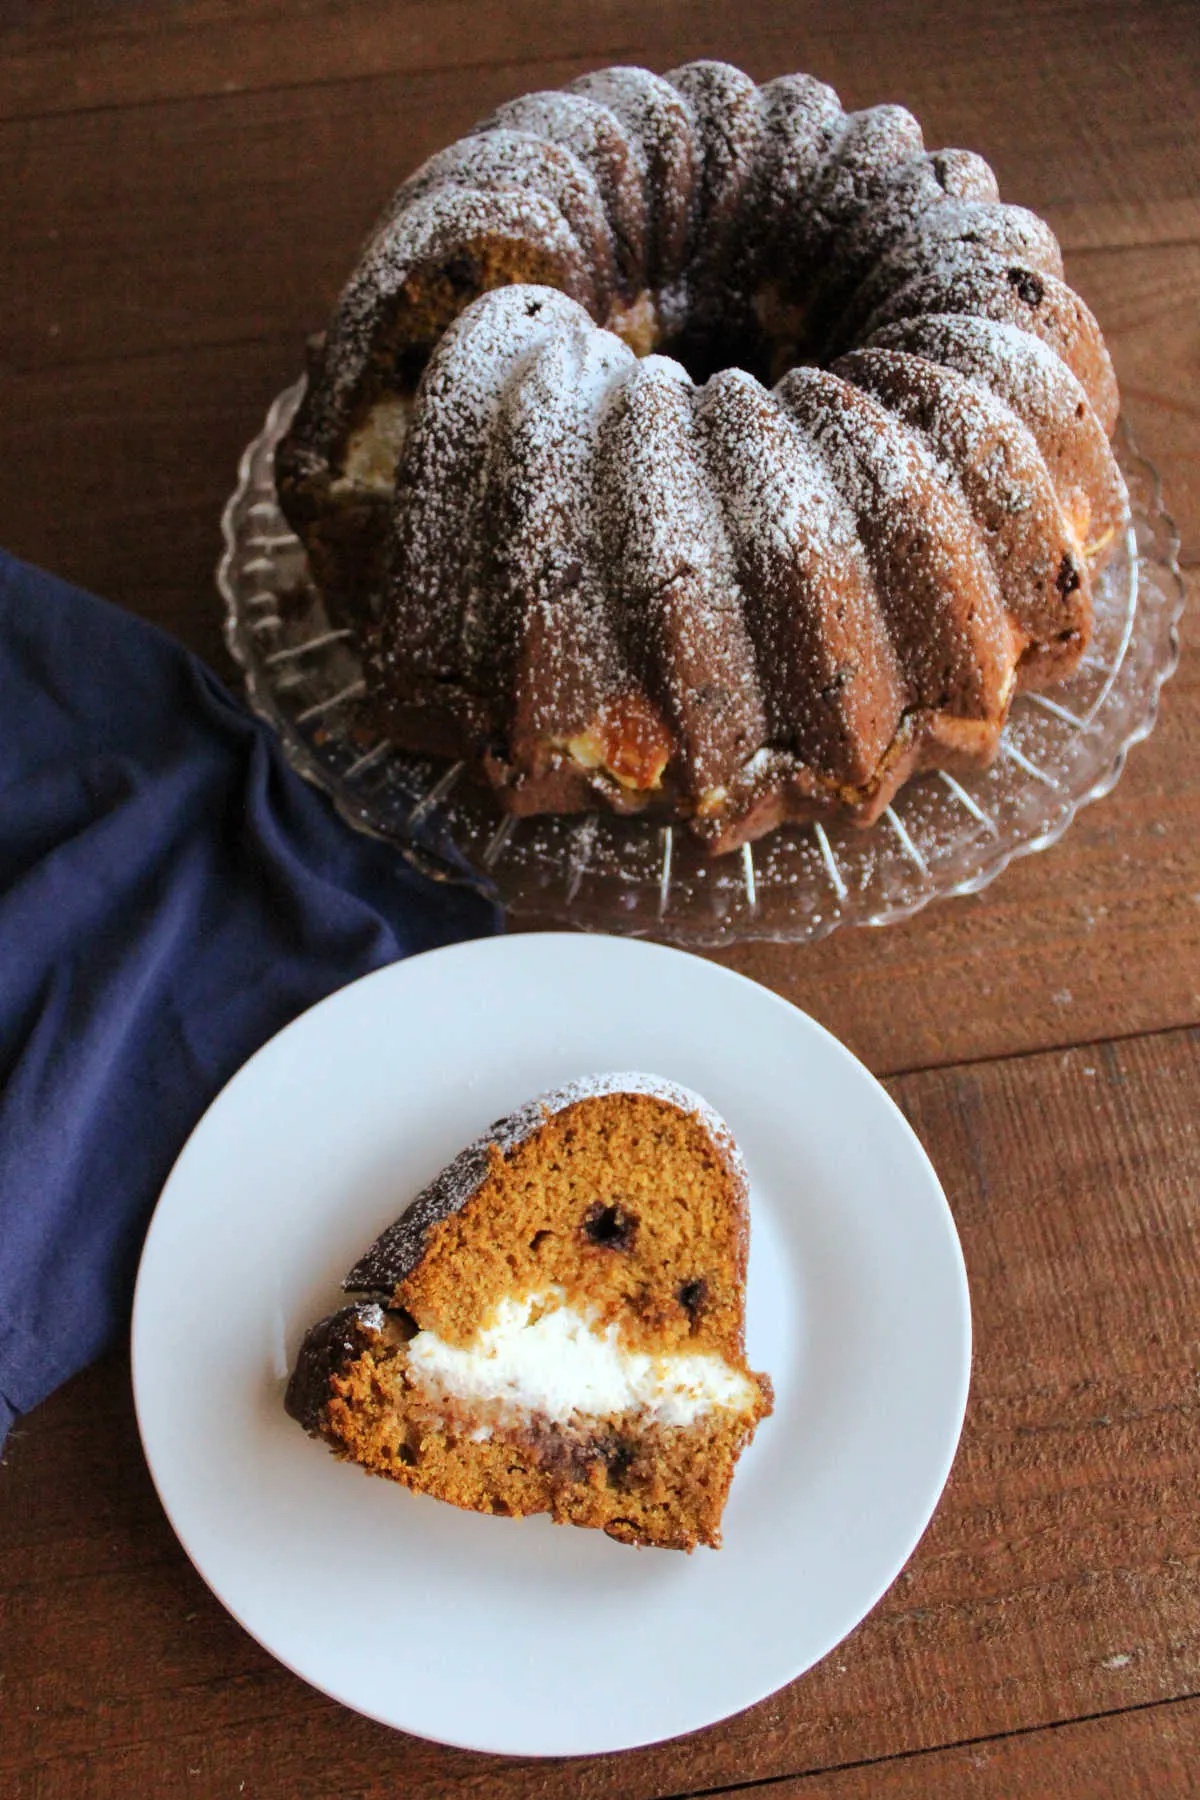 Slice of cream cheese stuffed pumpkin bundt cake with chocolate chips on plate with remaining powdered sugar dusted cake in the background.